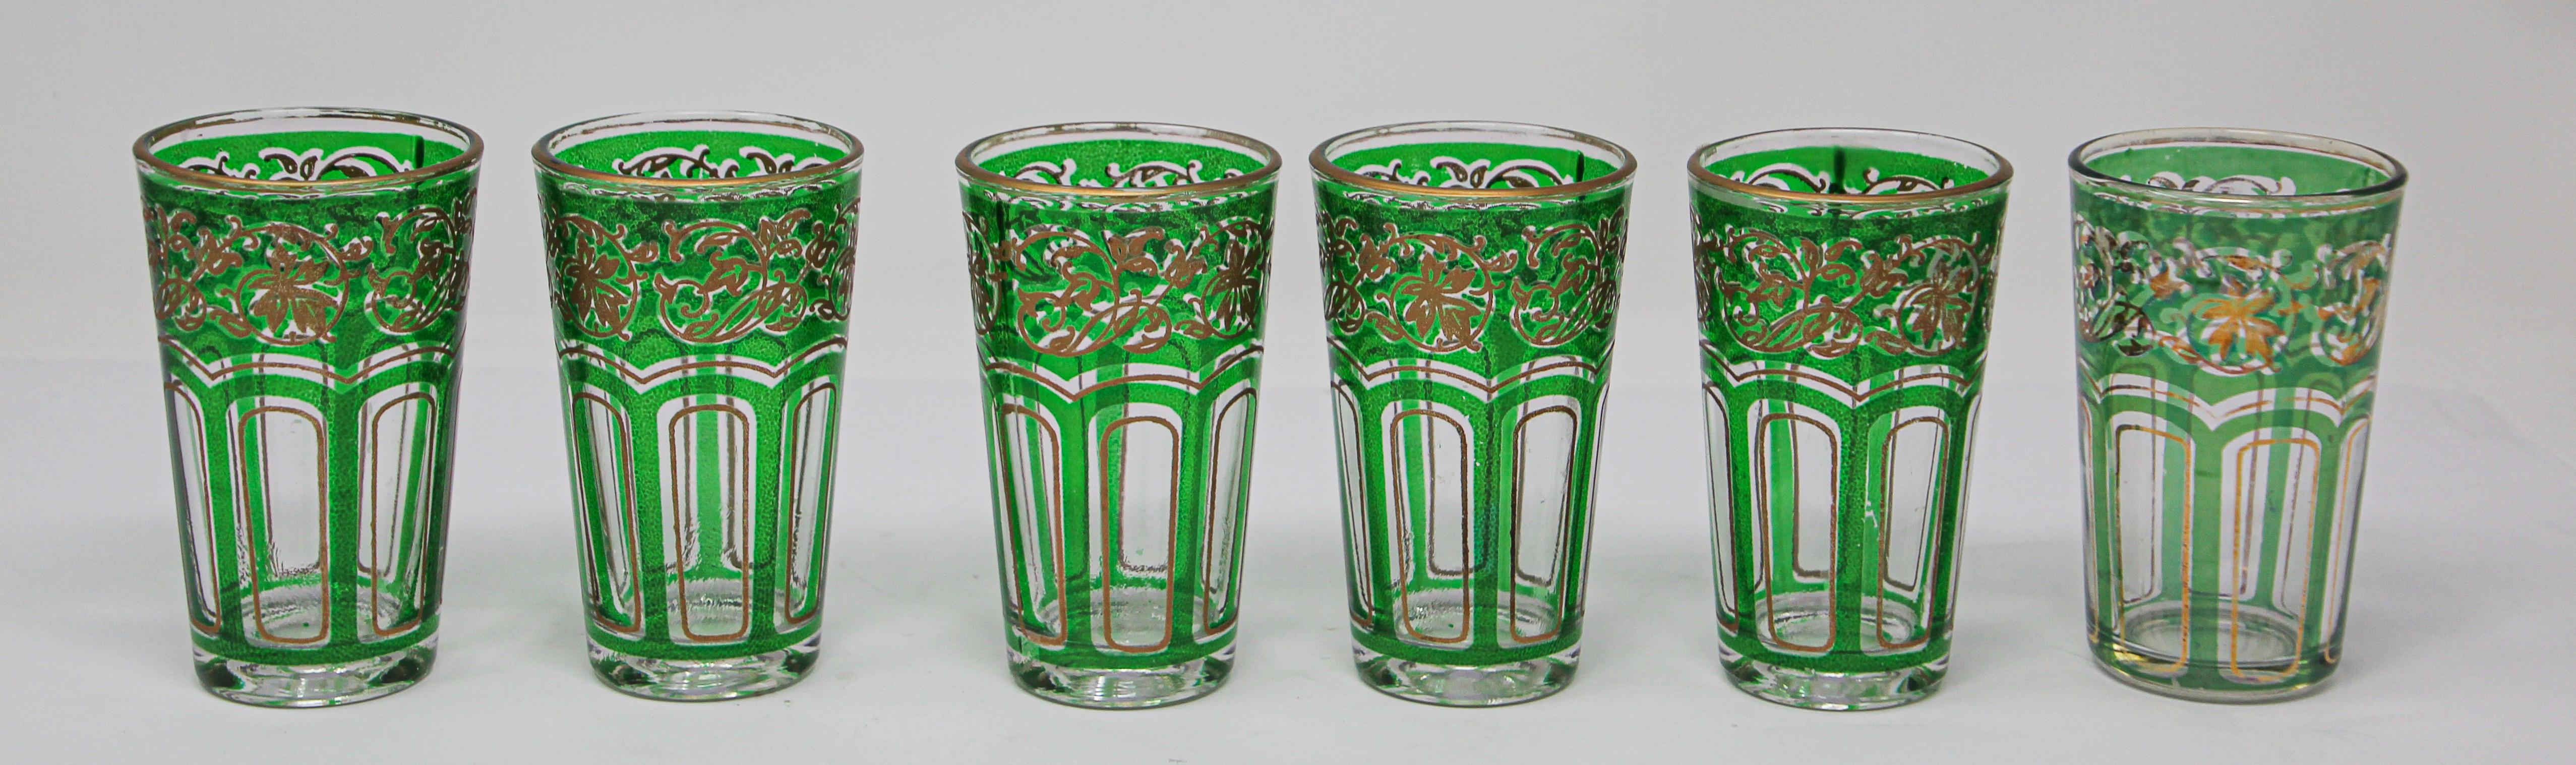 Set of six Moroccan emerald green glasses with gold raised Moorish design.
Decorated with a classical gold and pattern Moorish frieze. 
Use these elegant vintage glasses for Moroccan tea, or any hot or cold drink.
Perfect for the holidays and